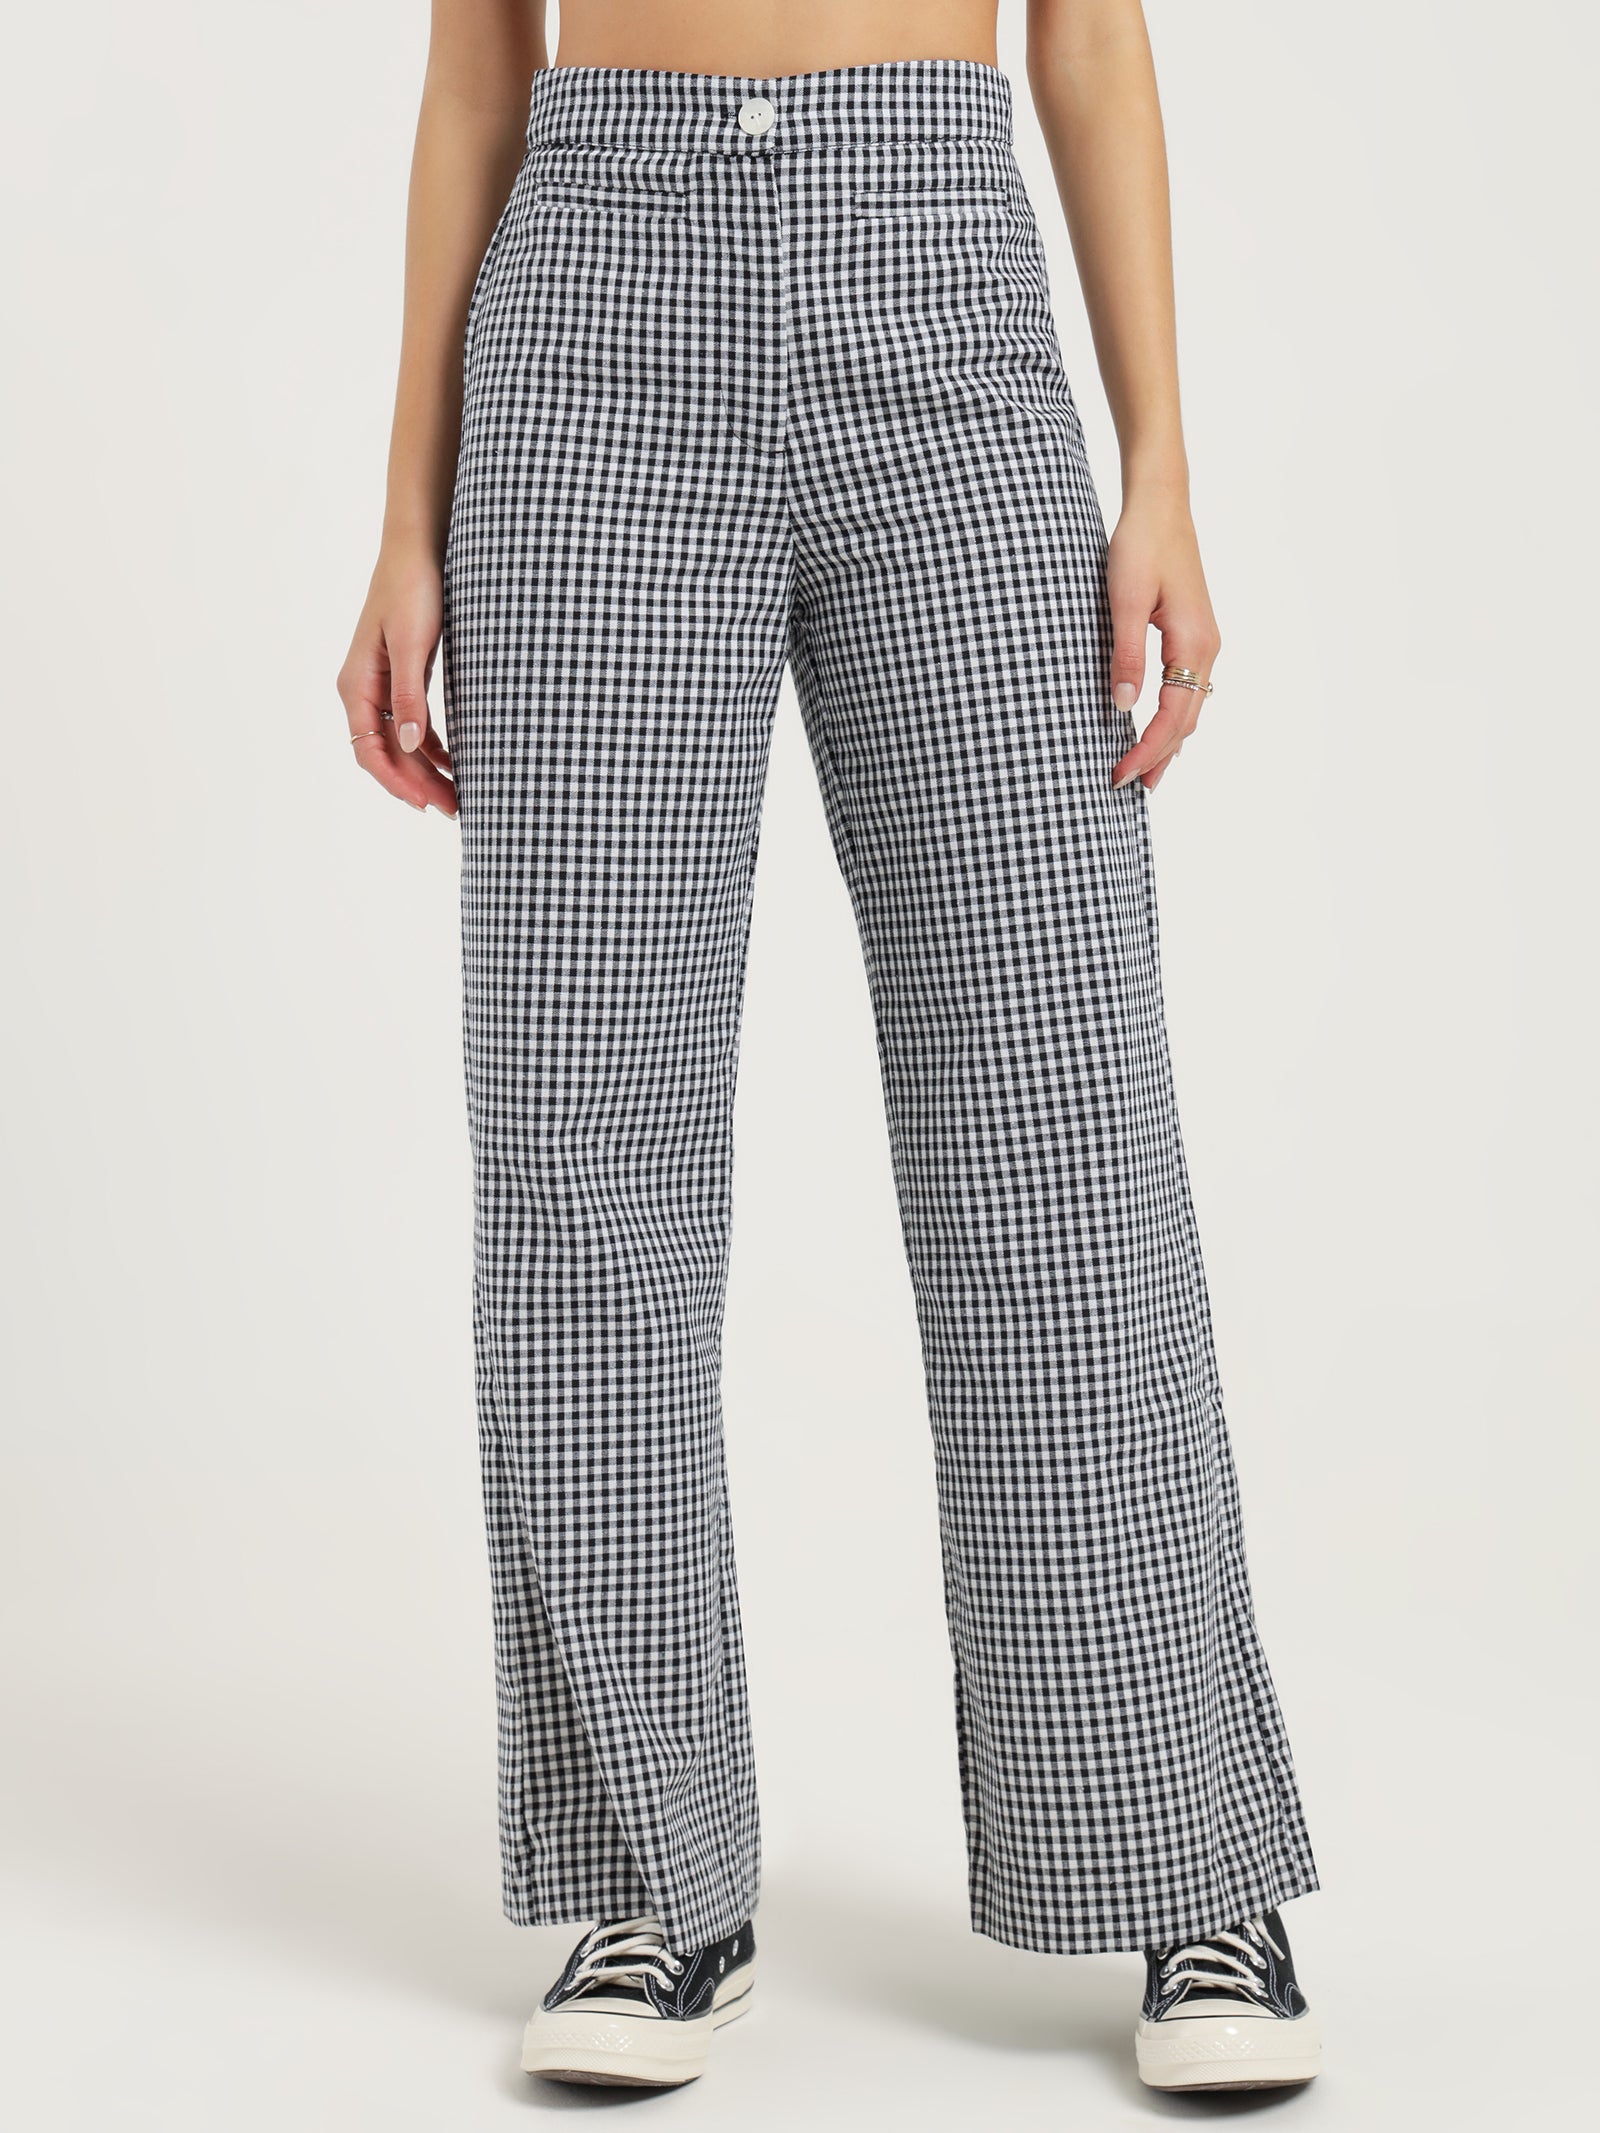 Gingham Pants, Shop The Largest Collection